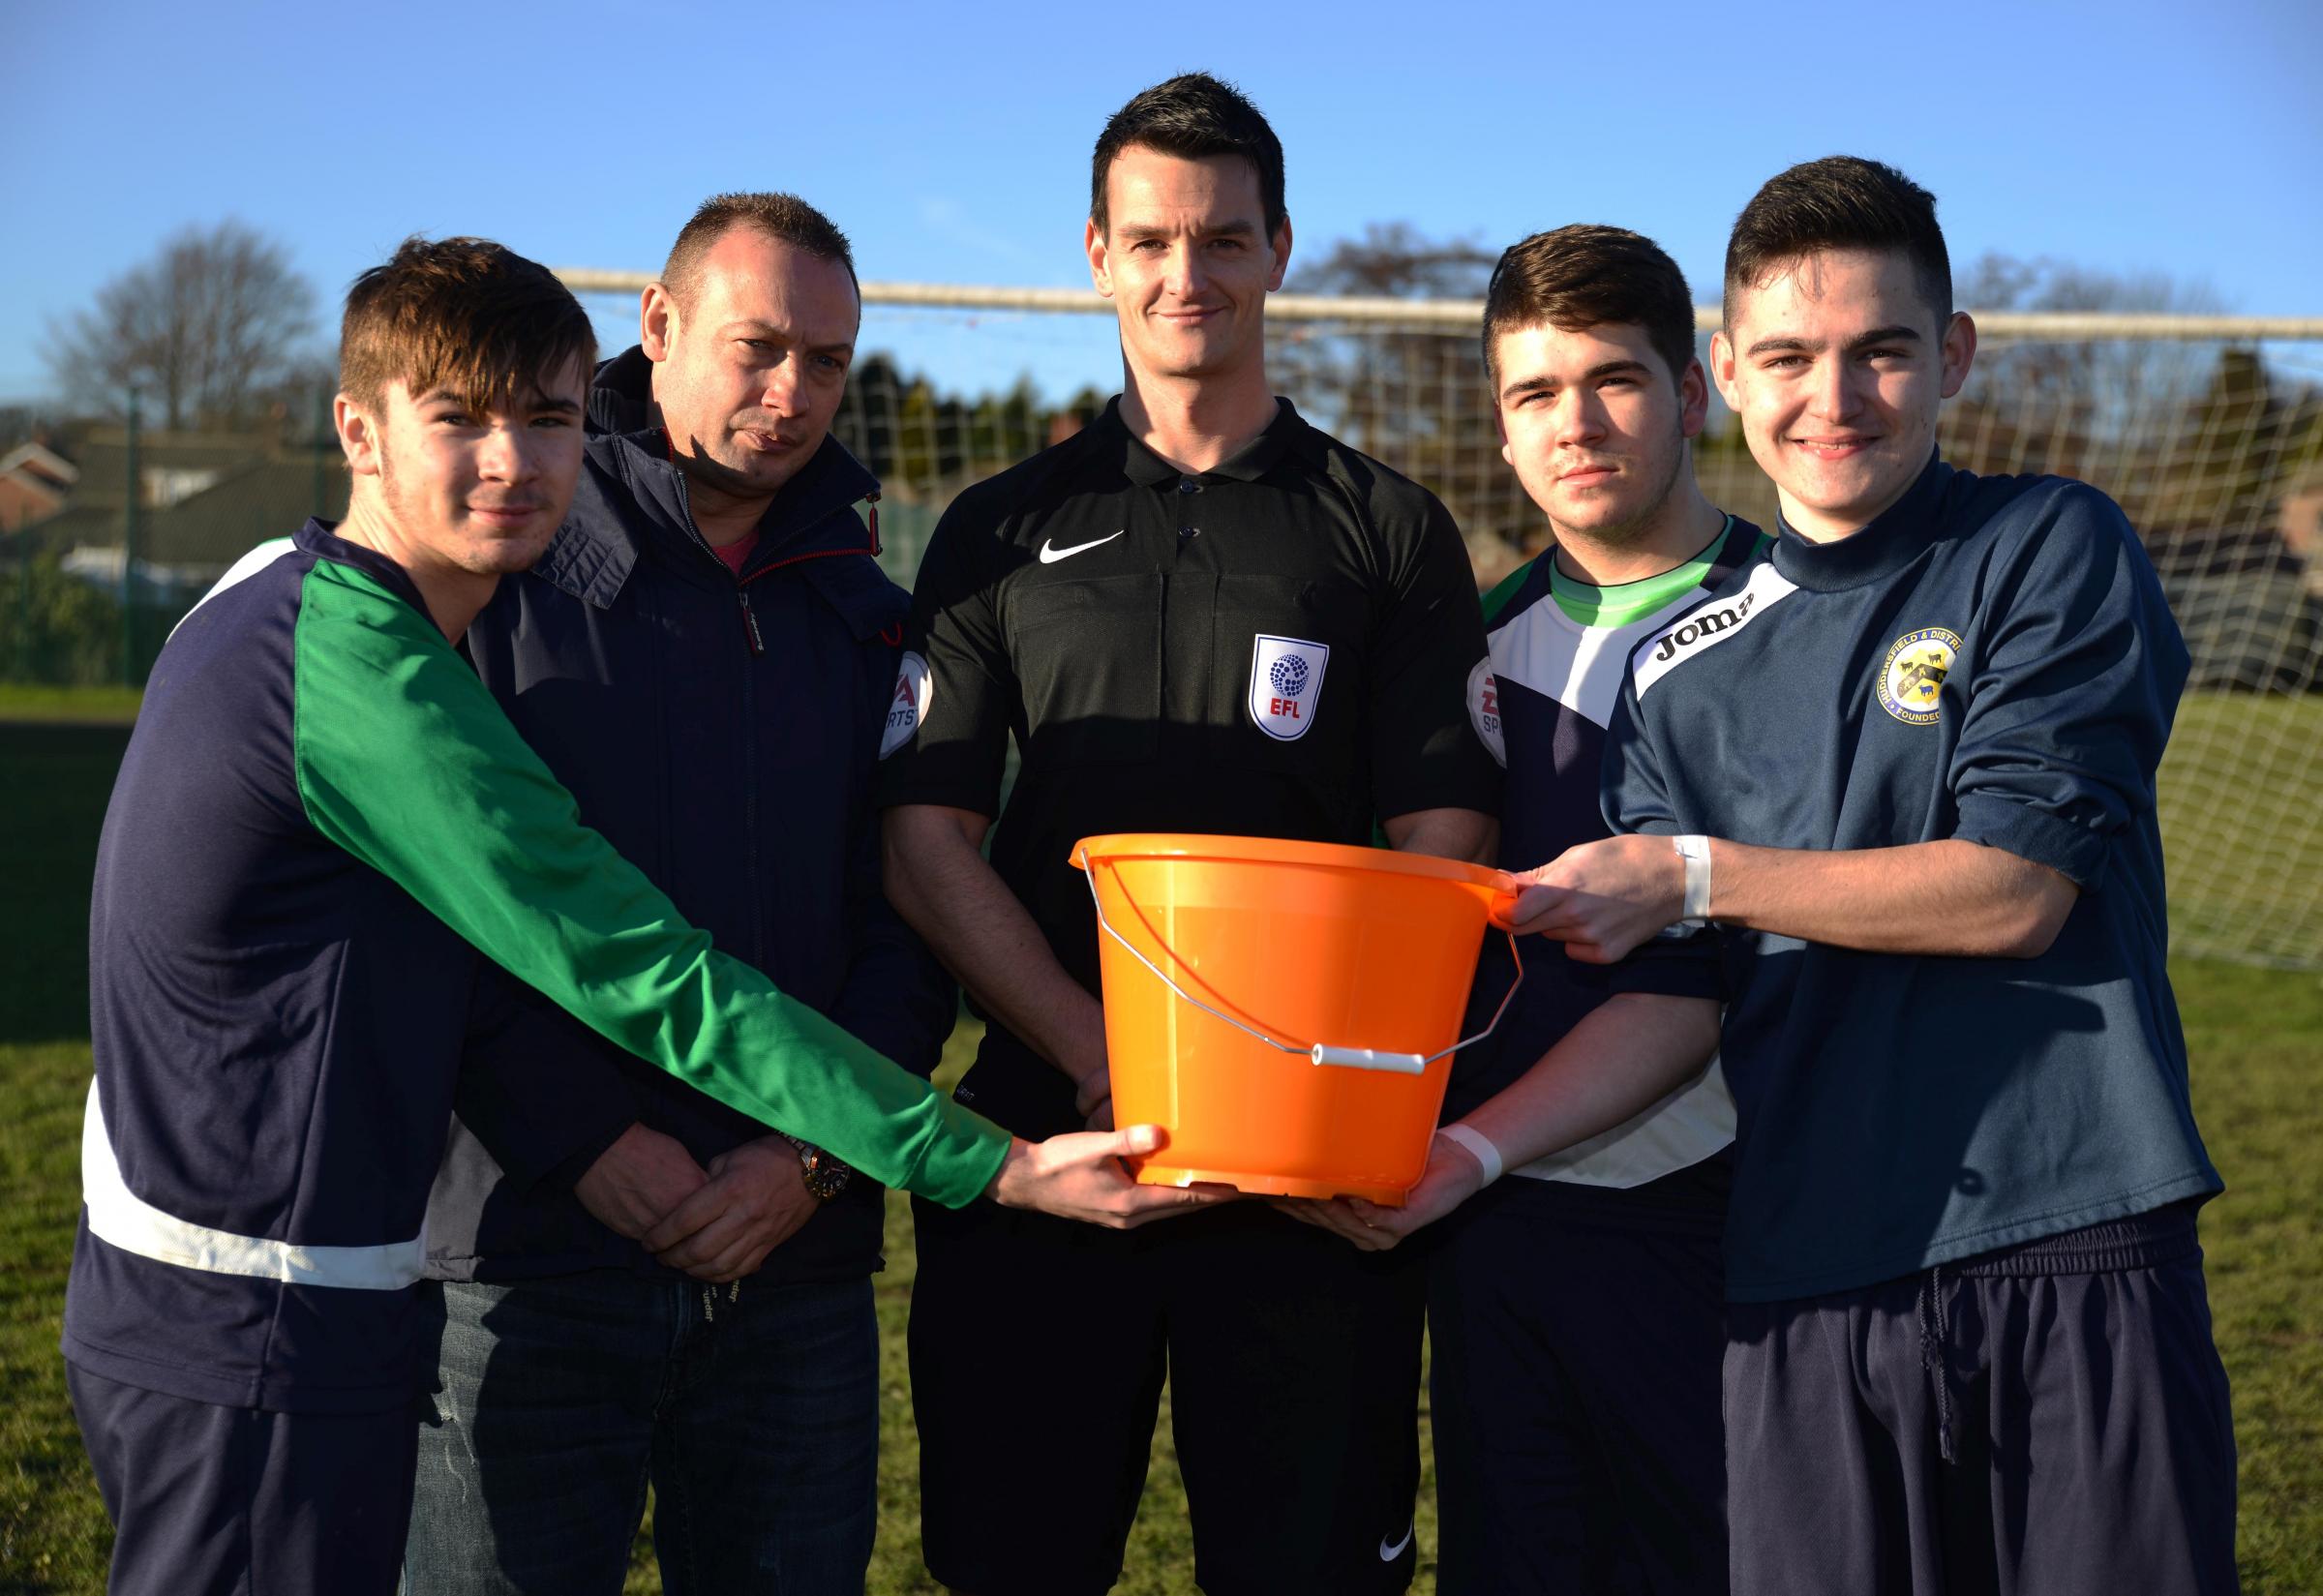 Top referee supports fundraiser in memory of Ellie Bramham